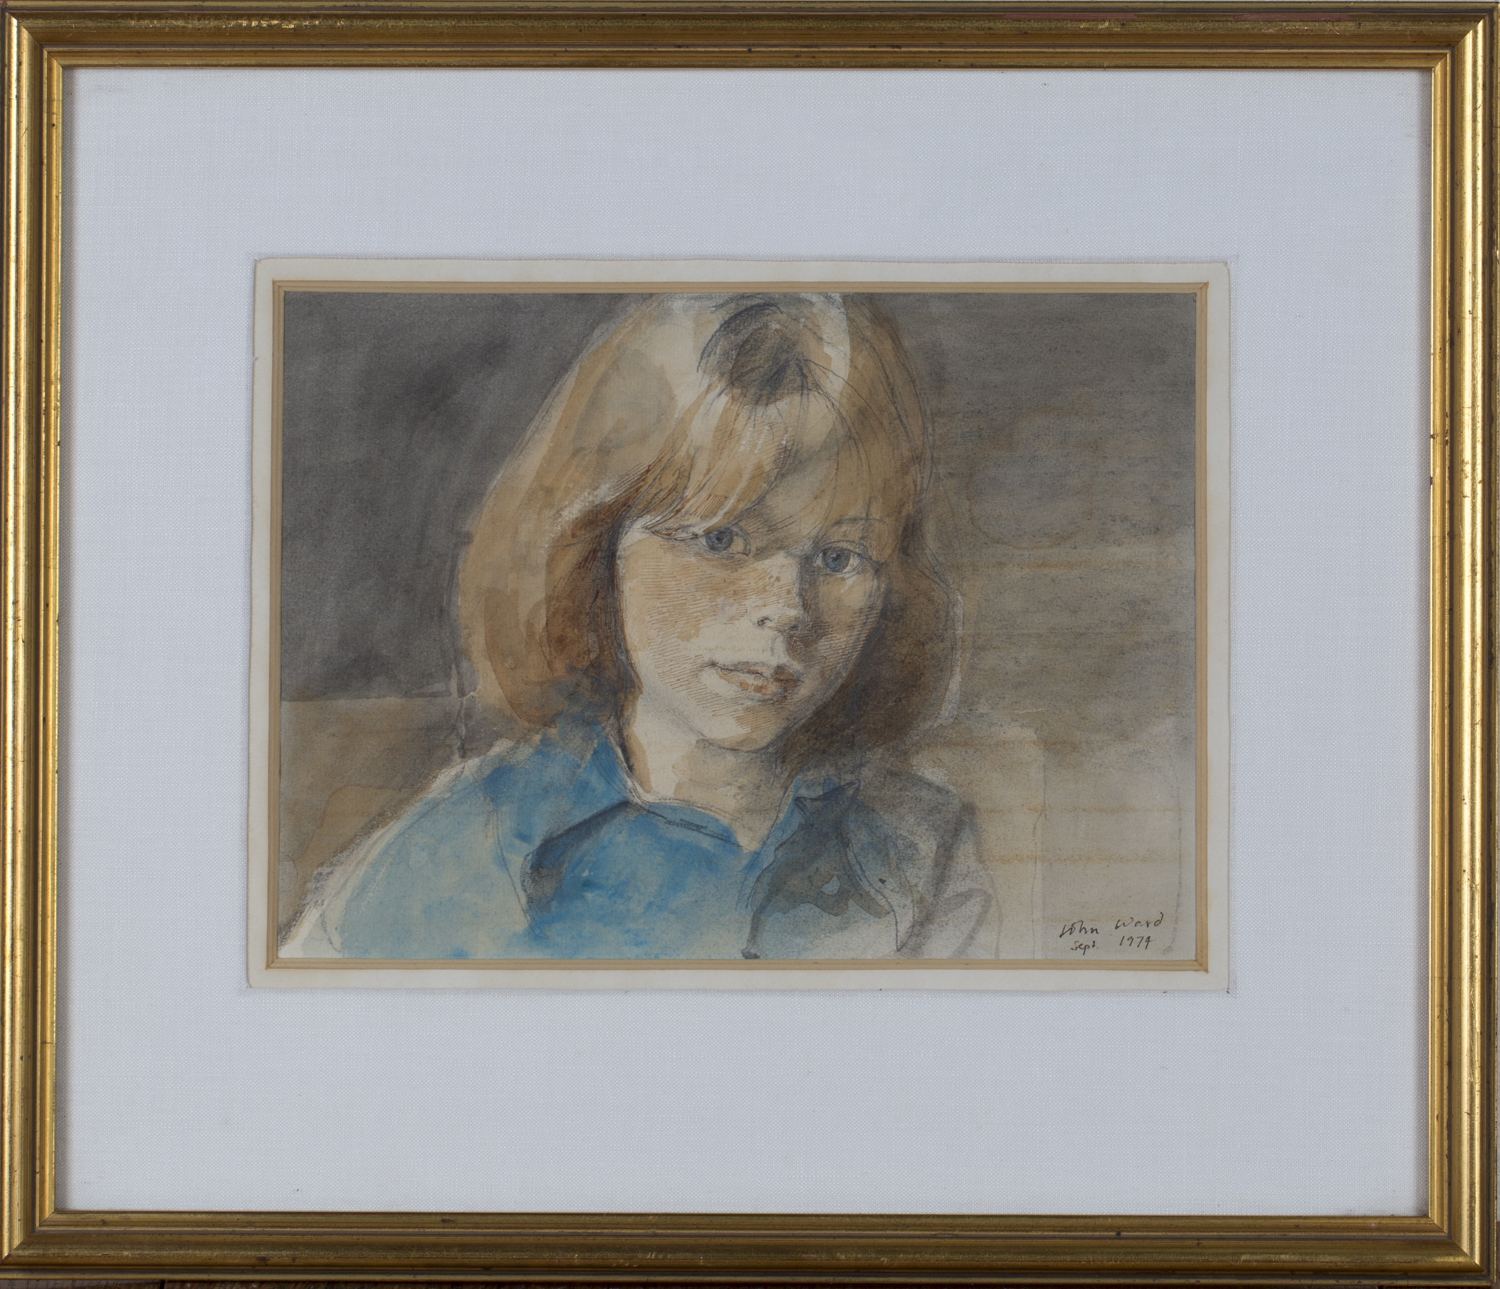 John Stanton Ward - Portrait of a Girl, watercolour with ink, signed and dated 1974, 21.5cm x